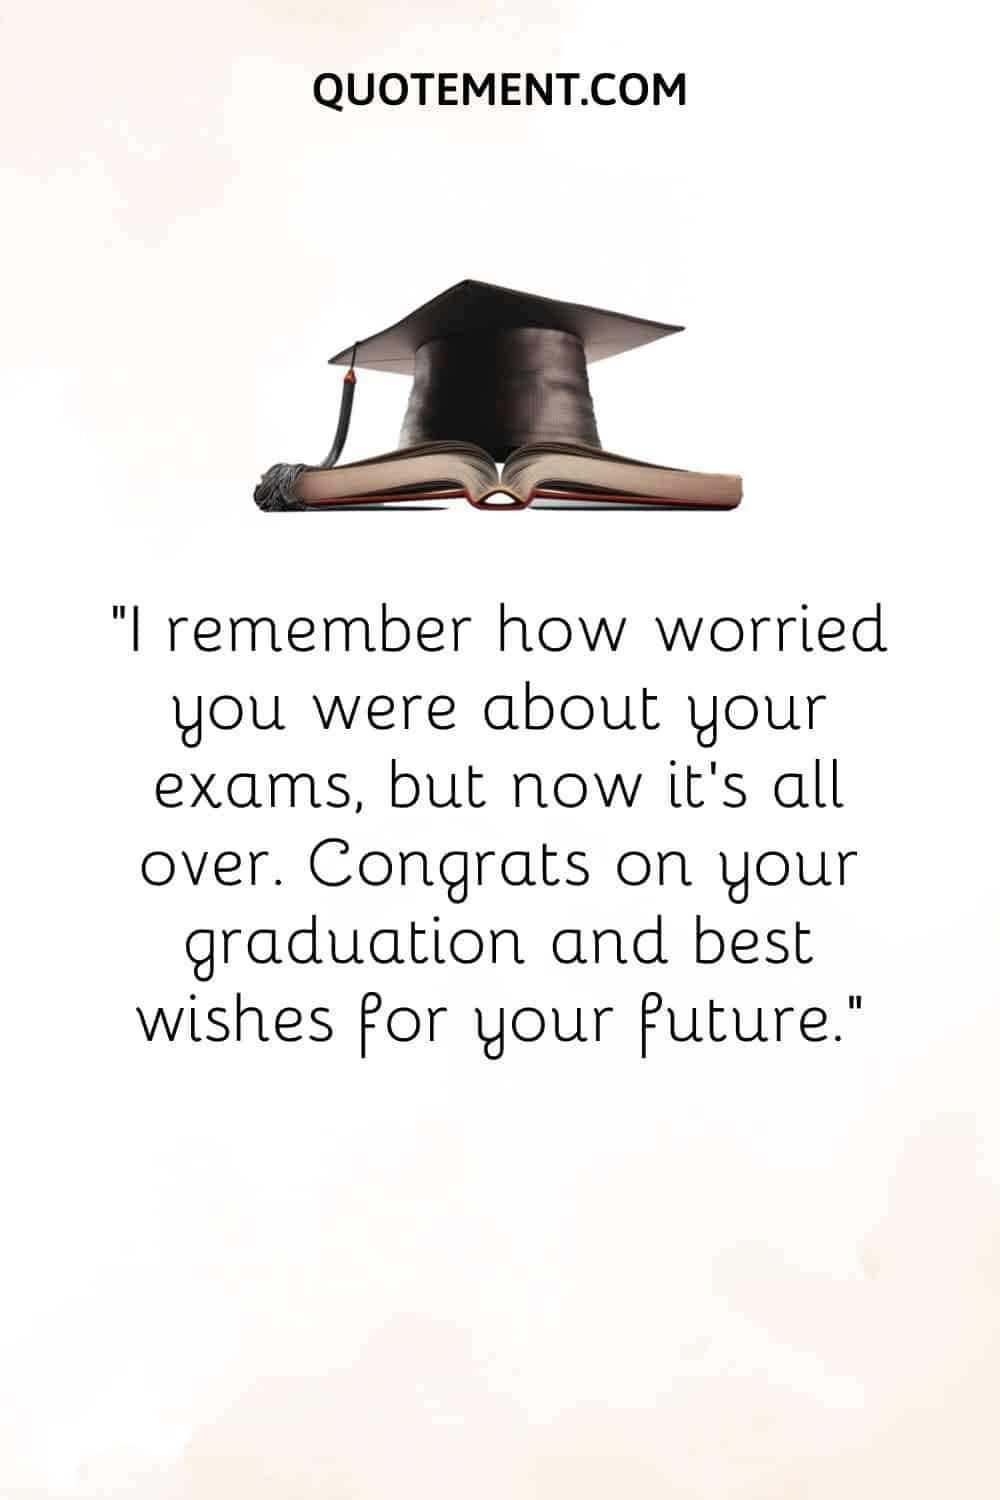 I remember how worried you were about your exams, but now it’s all over. Congrats on your graduation and best wishes for your future.